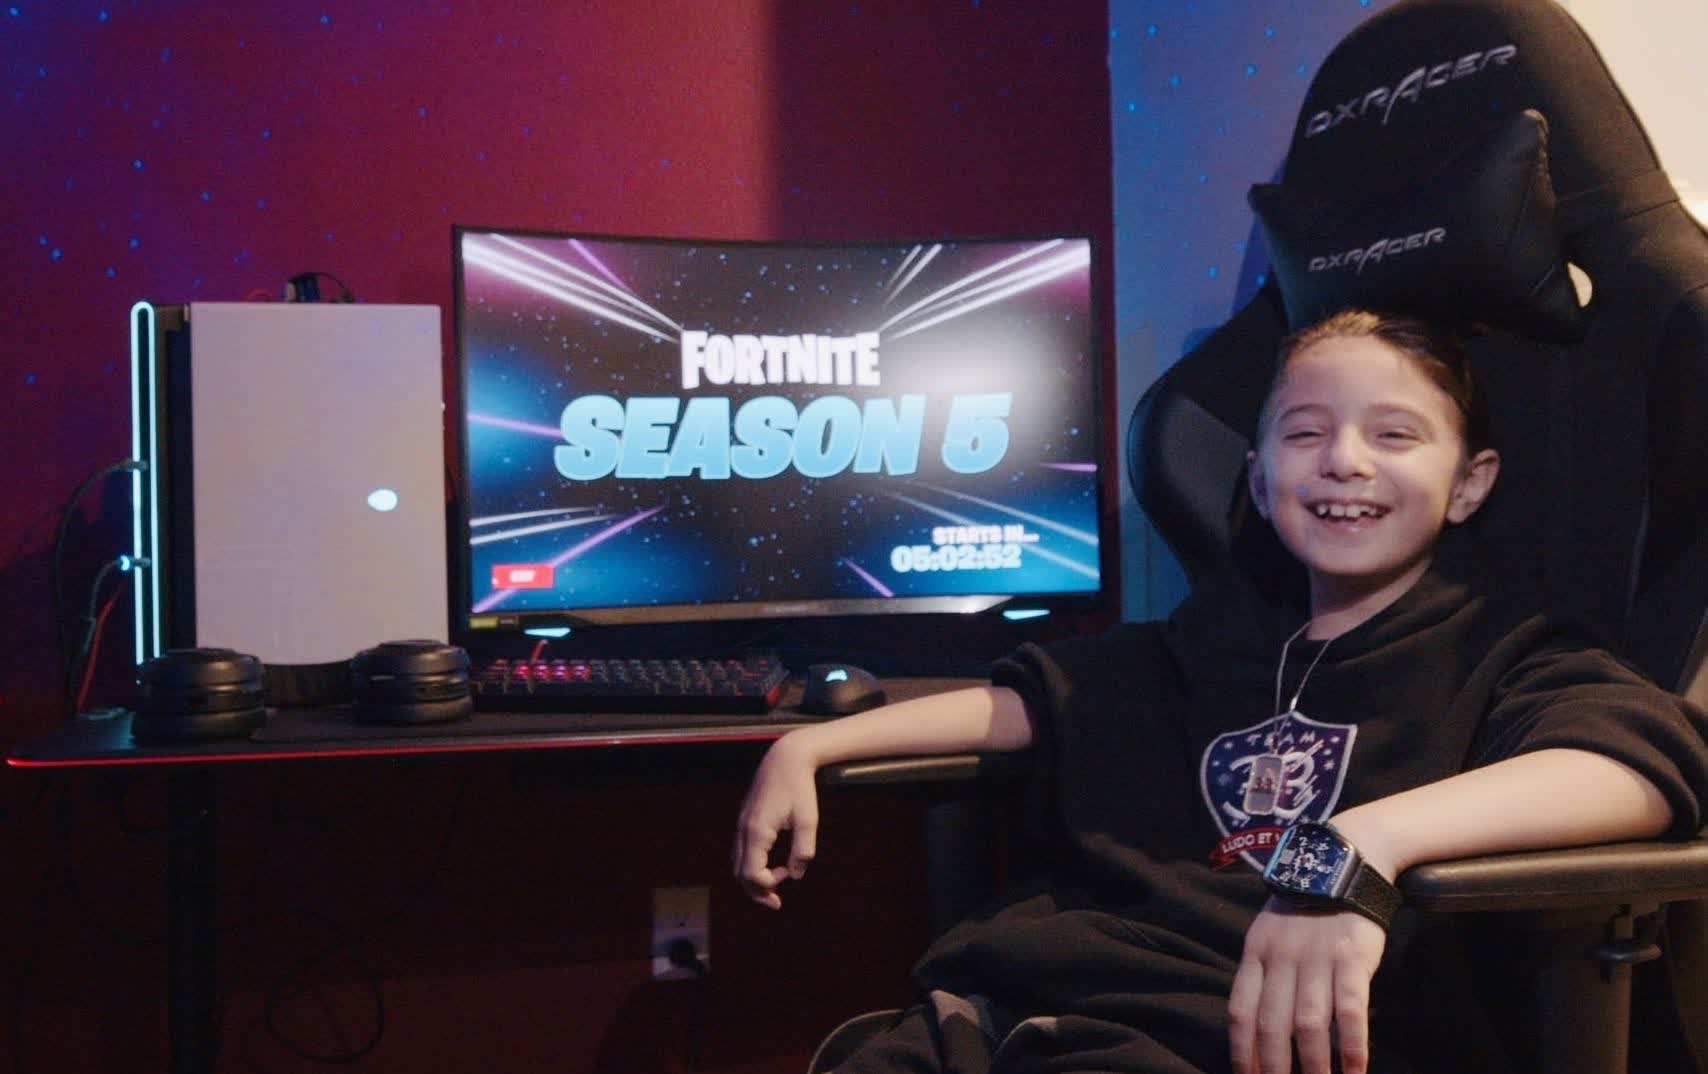 Eight-year-old Fortnite player given $33,000 and $5,000 PC for turning pro